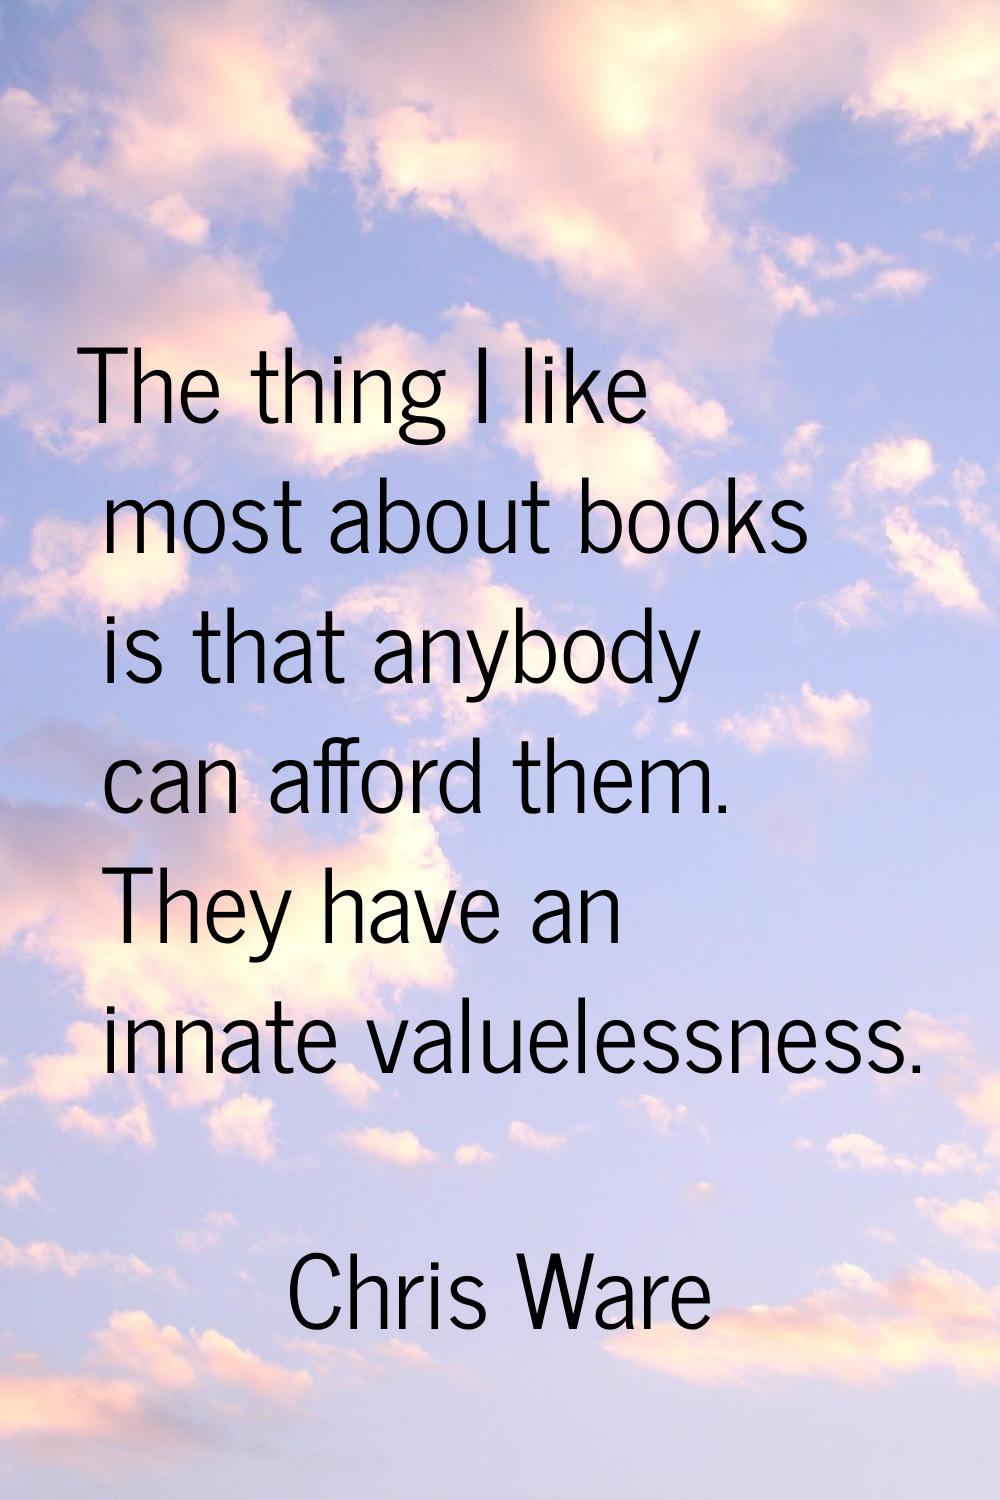 The thing I like most about books is that anybody can afford them. They have an innate valuelessnes